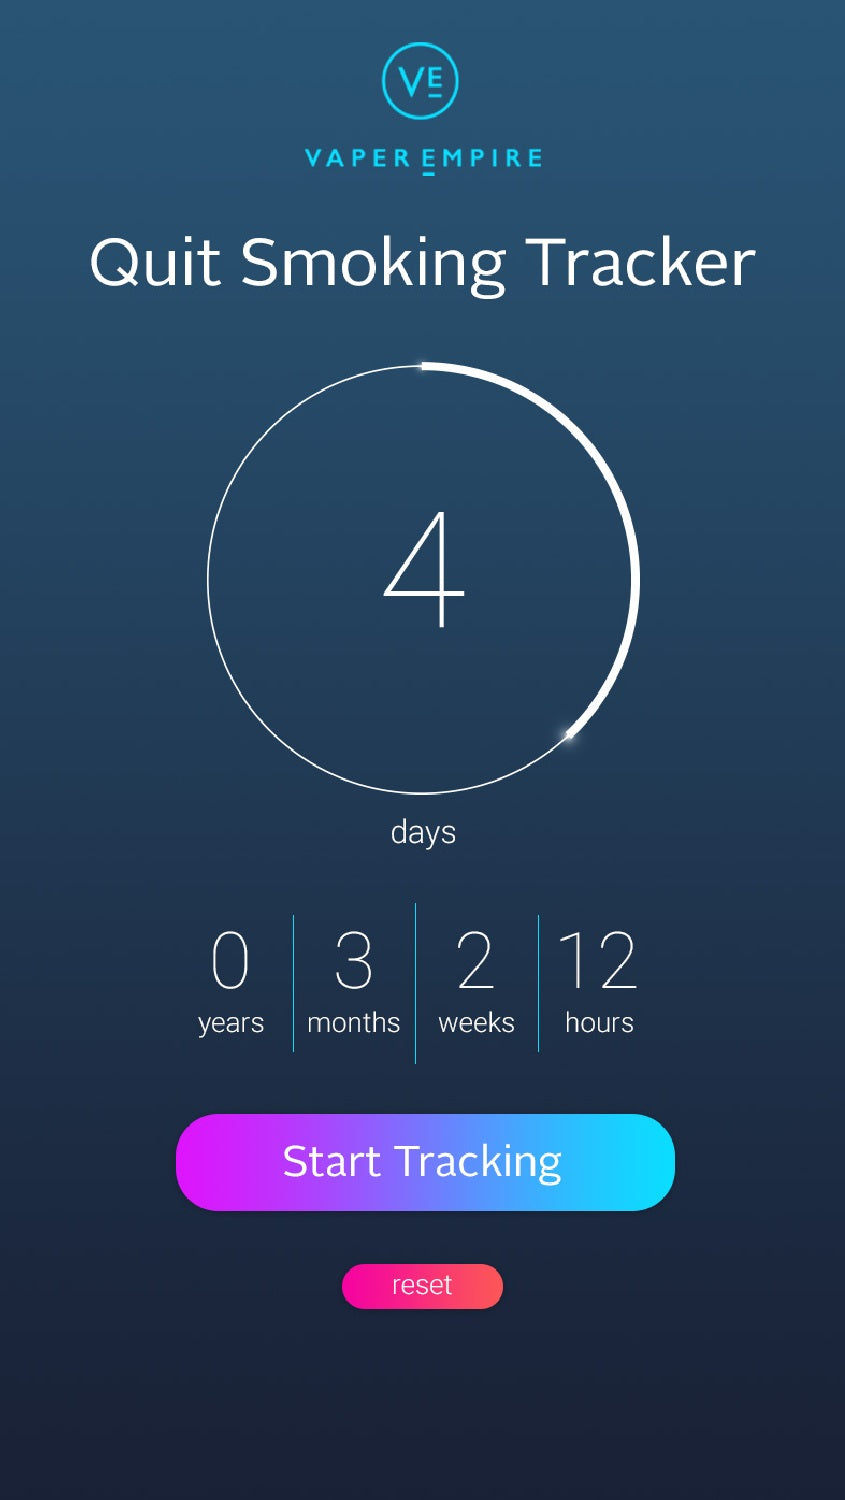 Trying To Quit Smoking? There’s An App To Help You Track Your Progress